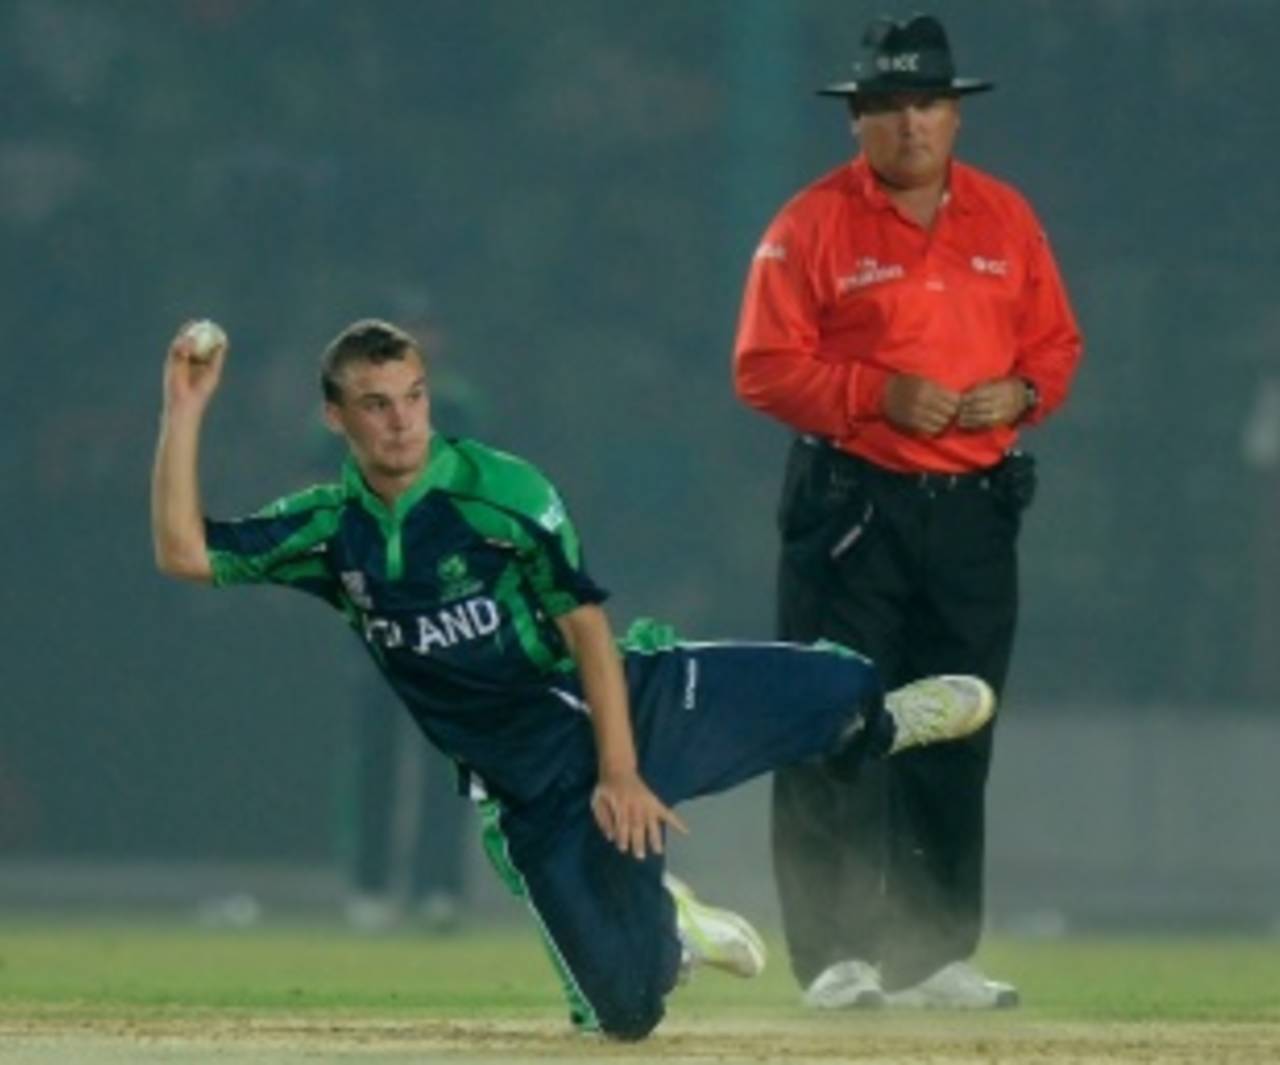 Ireland will look to introspect on why a young spinner like Andrew McBrine was given the second over against the explosive Netherlands openers&nbsp;&nbsp;&bull;&nbsp;&nbsp;ICC